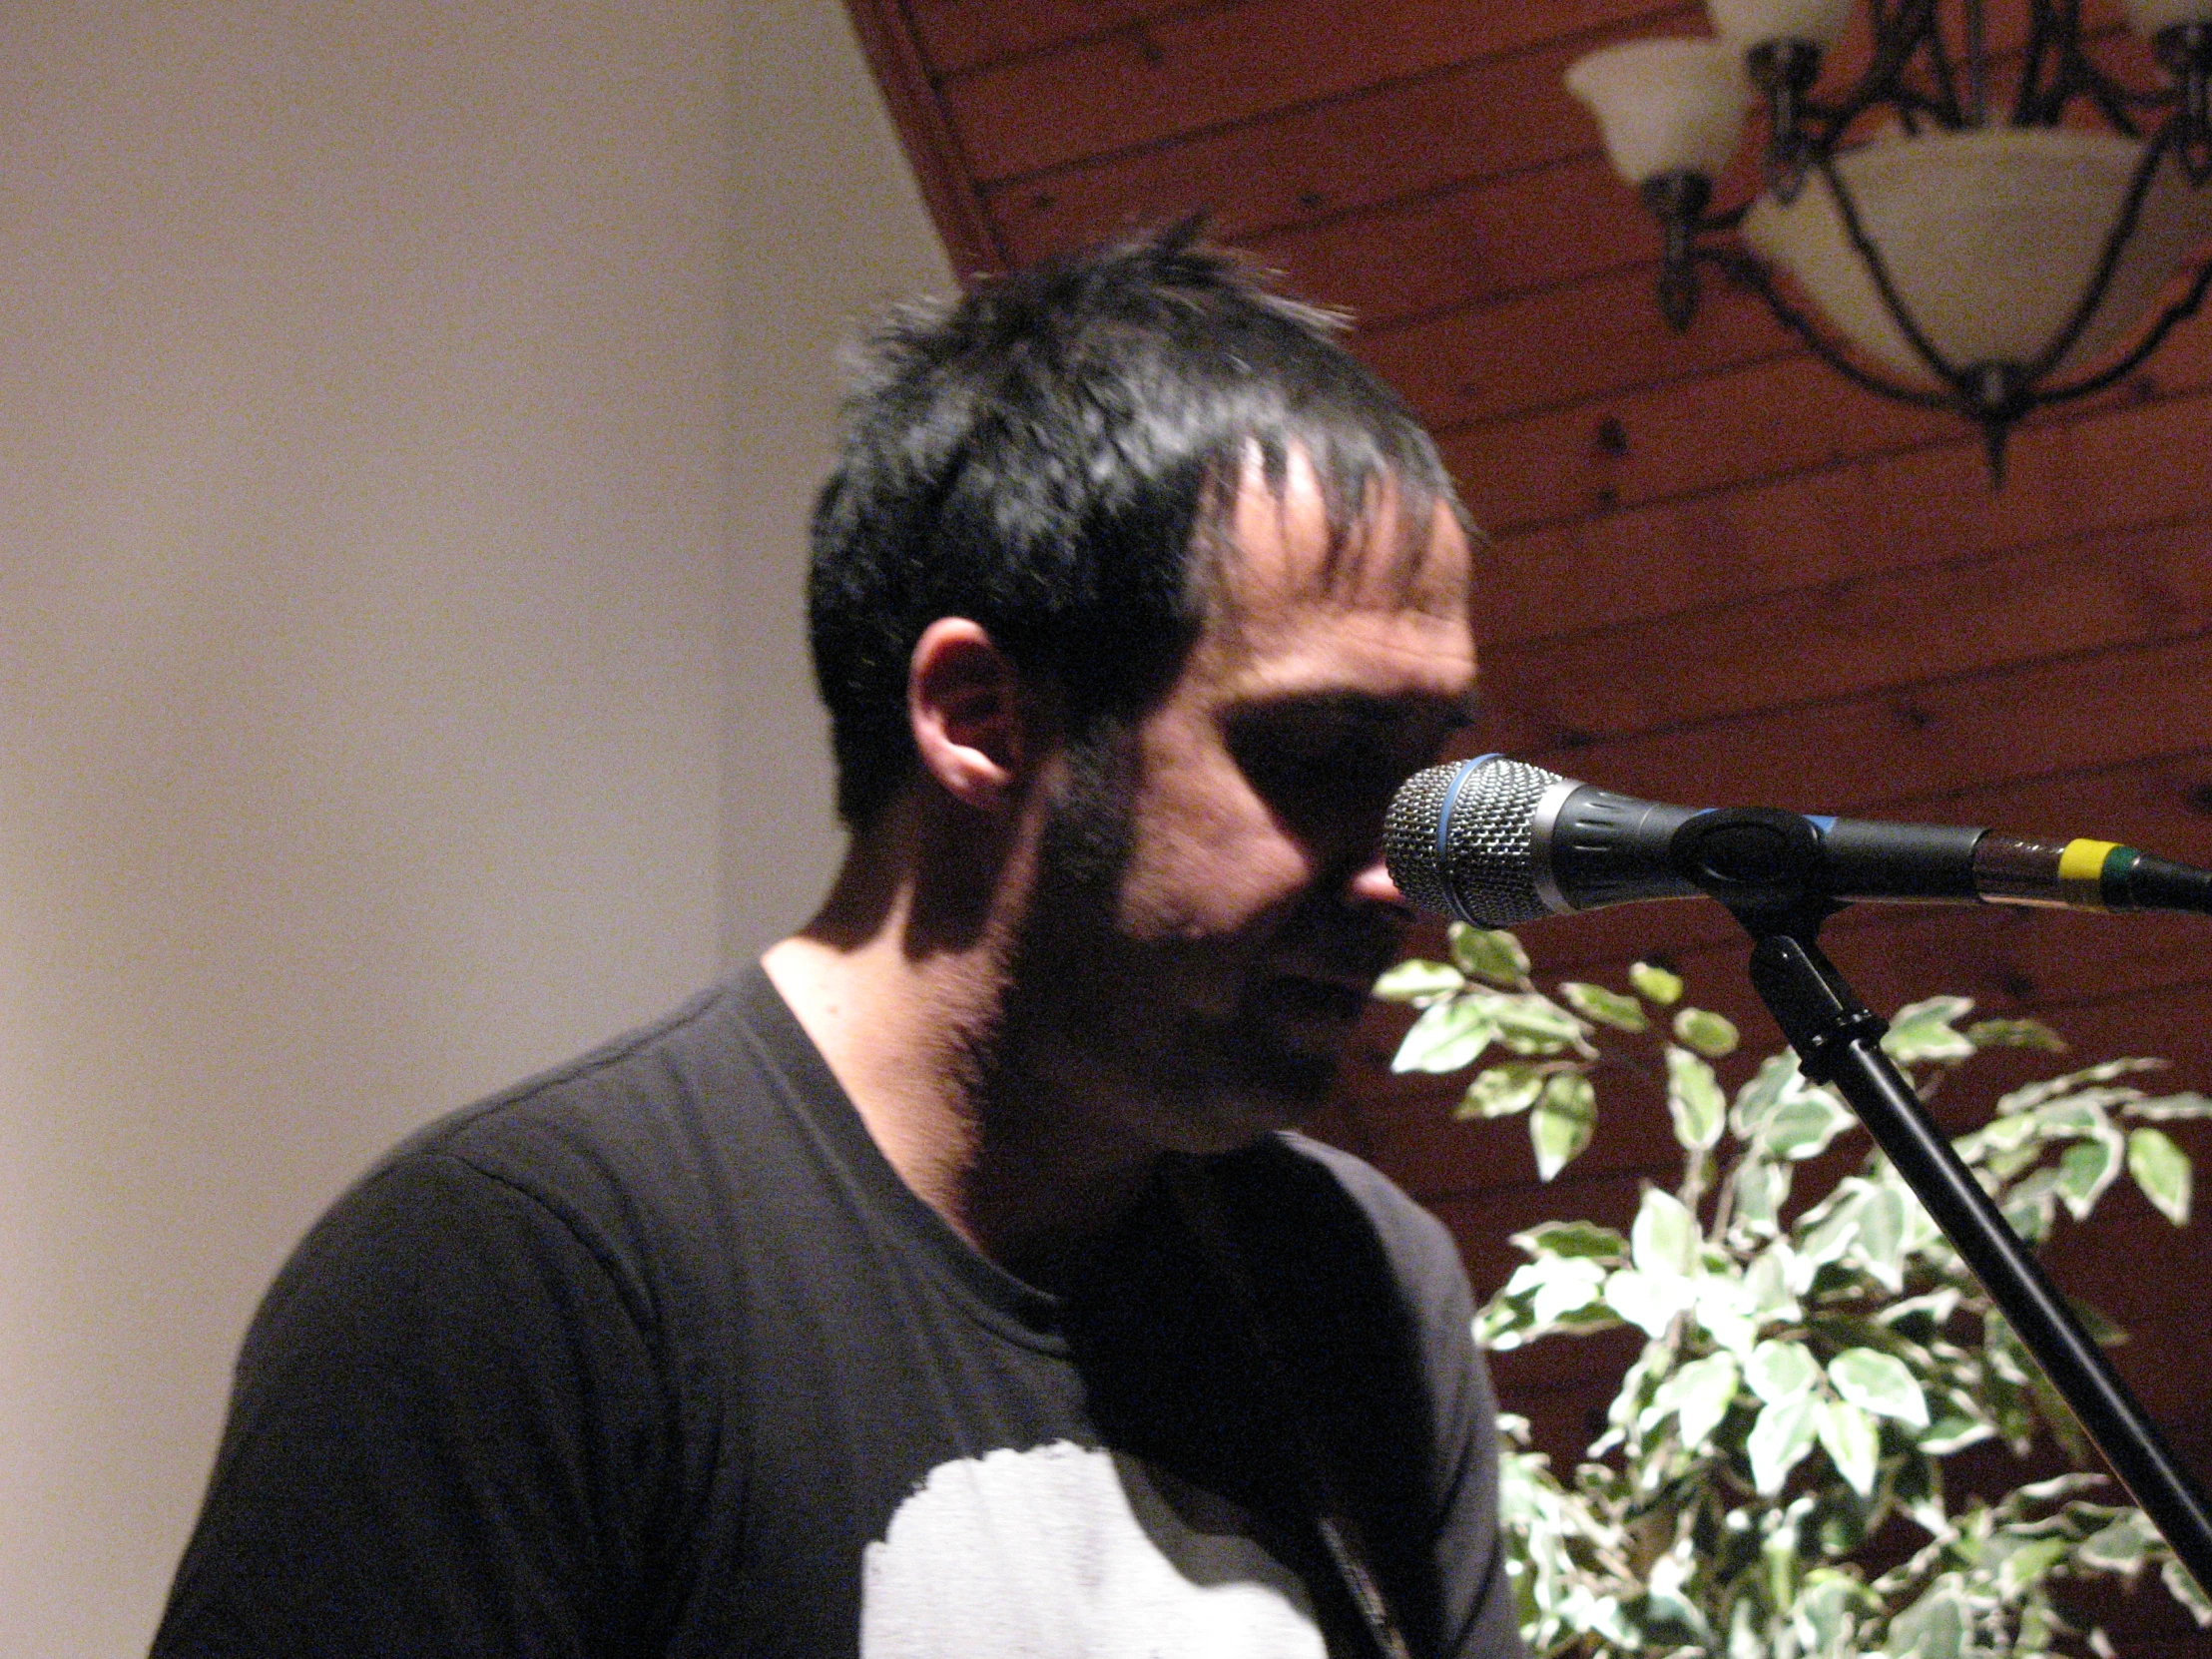 a man is playing an instrument in front of a microphone